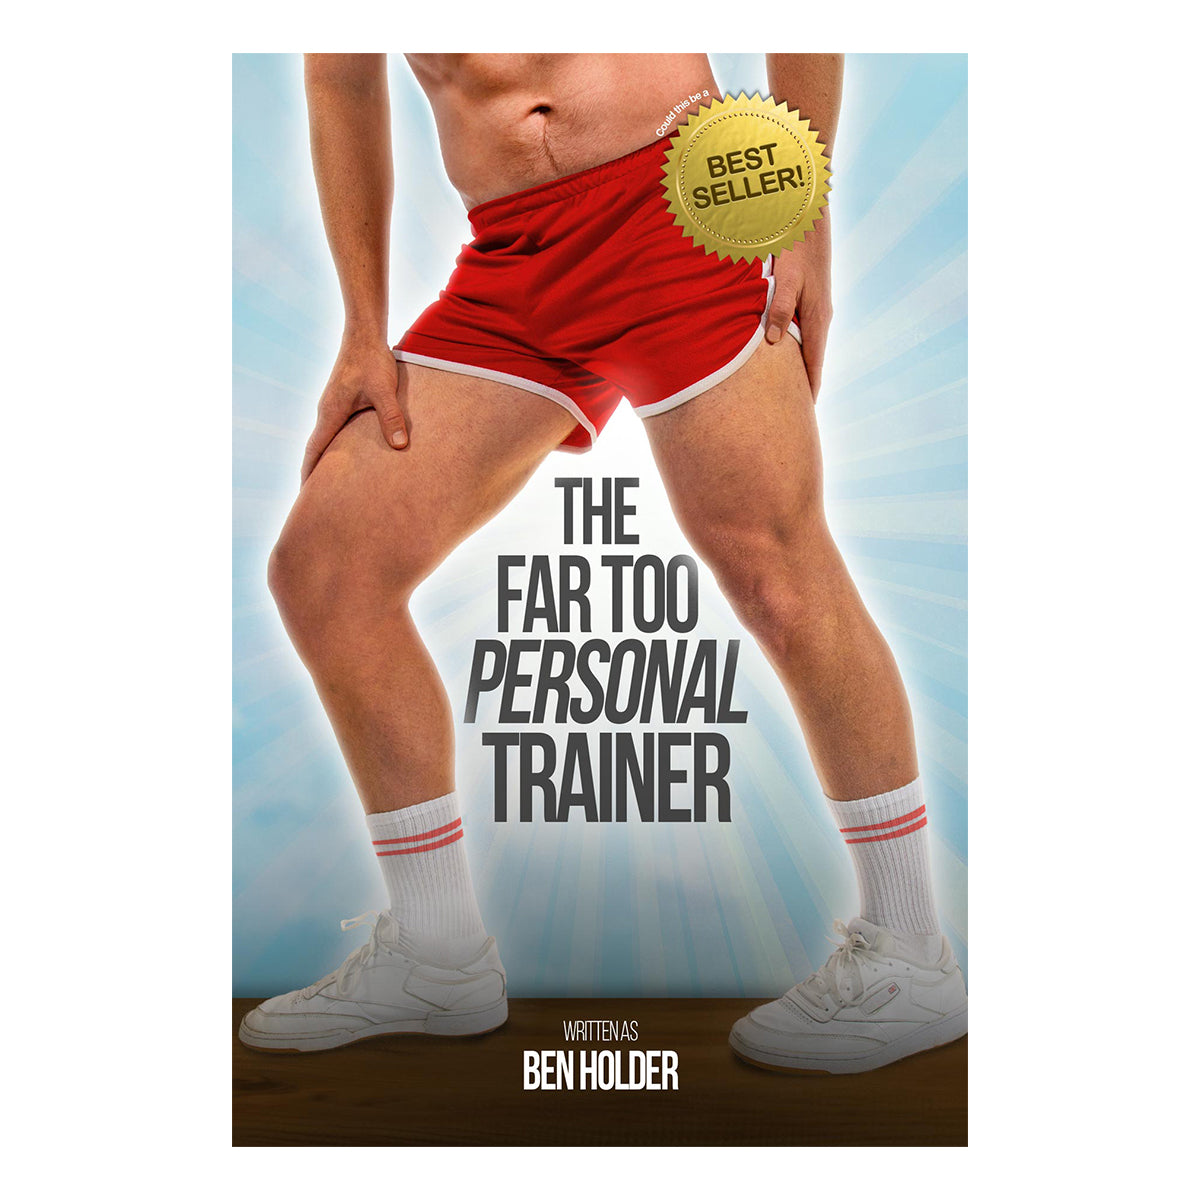 The Far too Personal Trainer (Softcover)